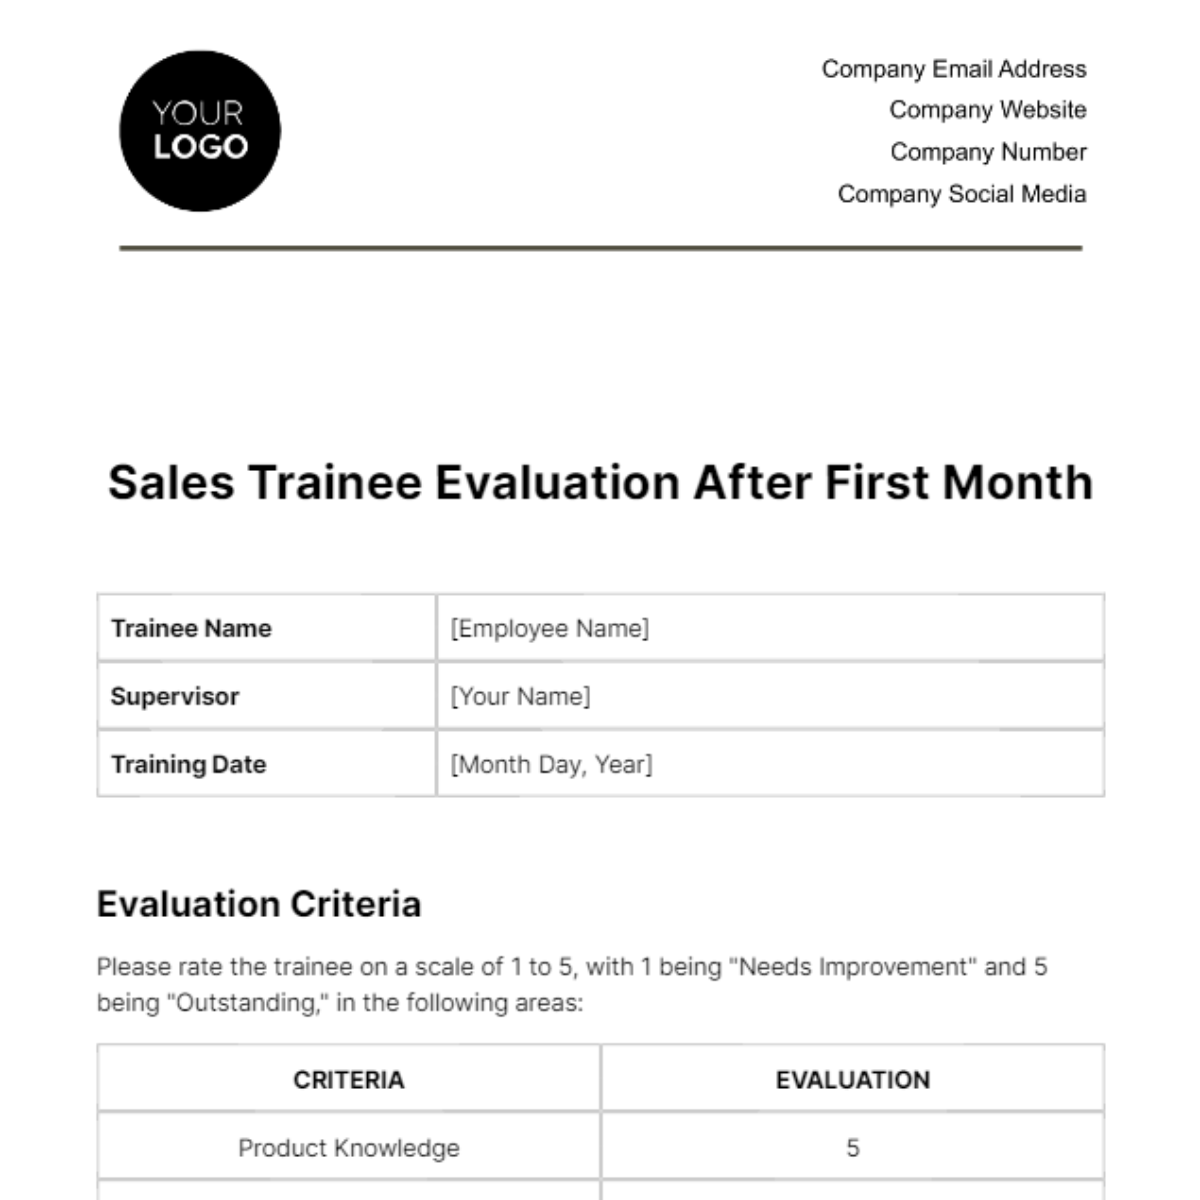 Free Sales Trainee Evaluation After First Month Template